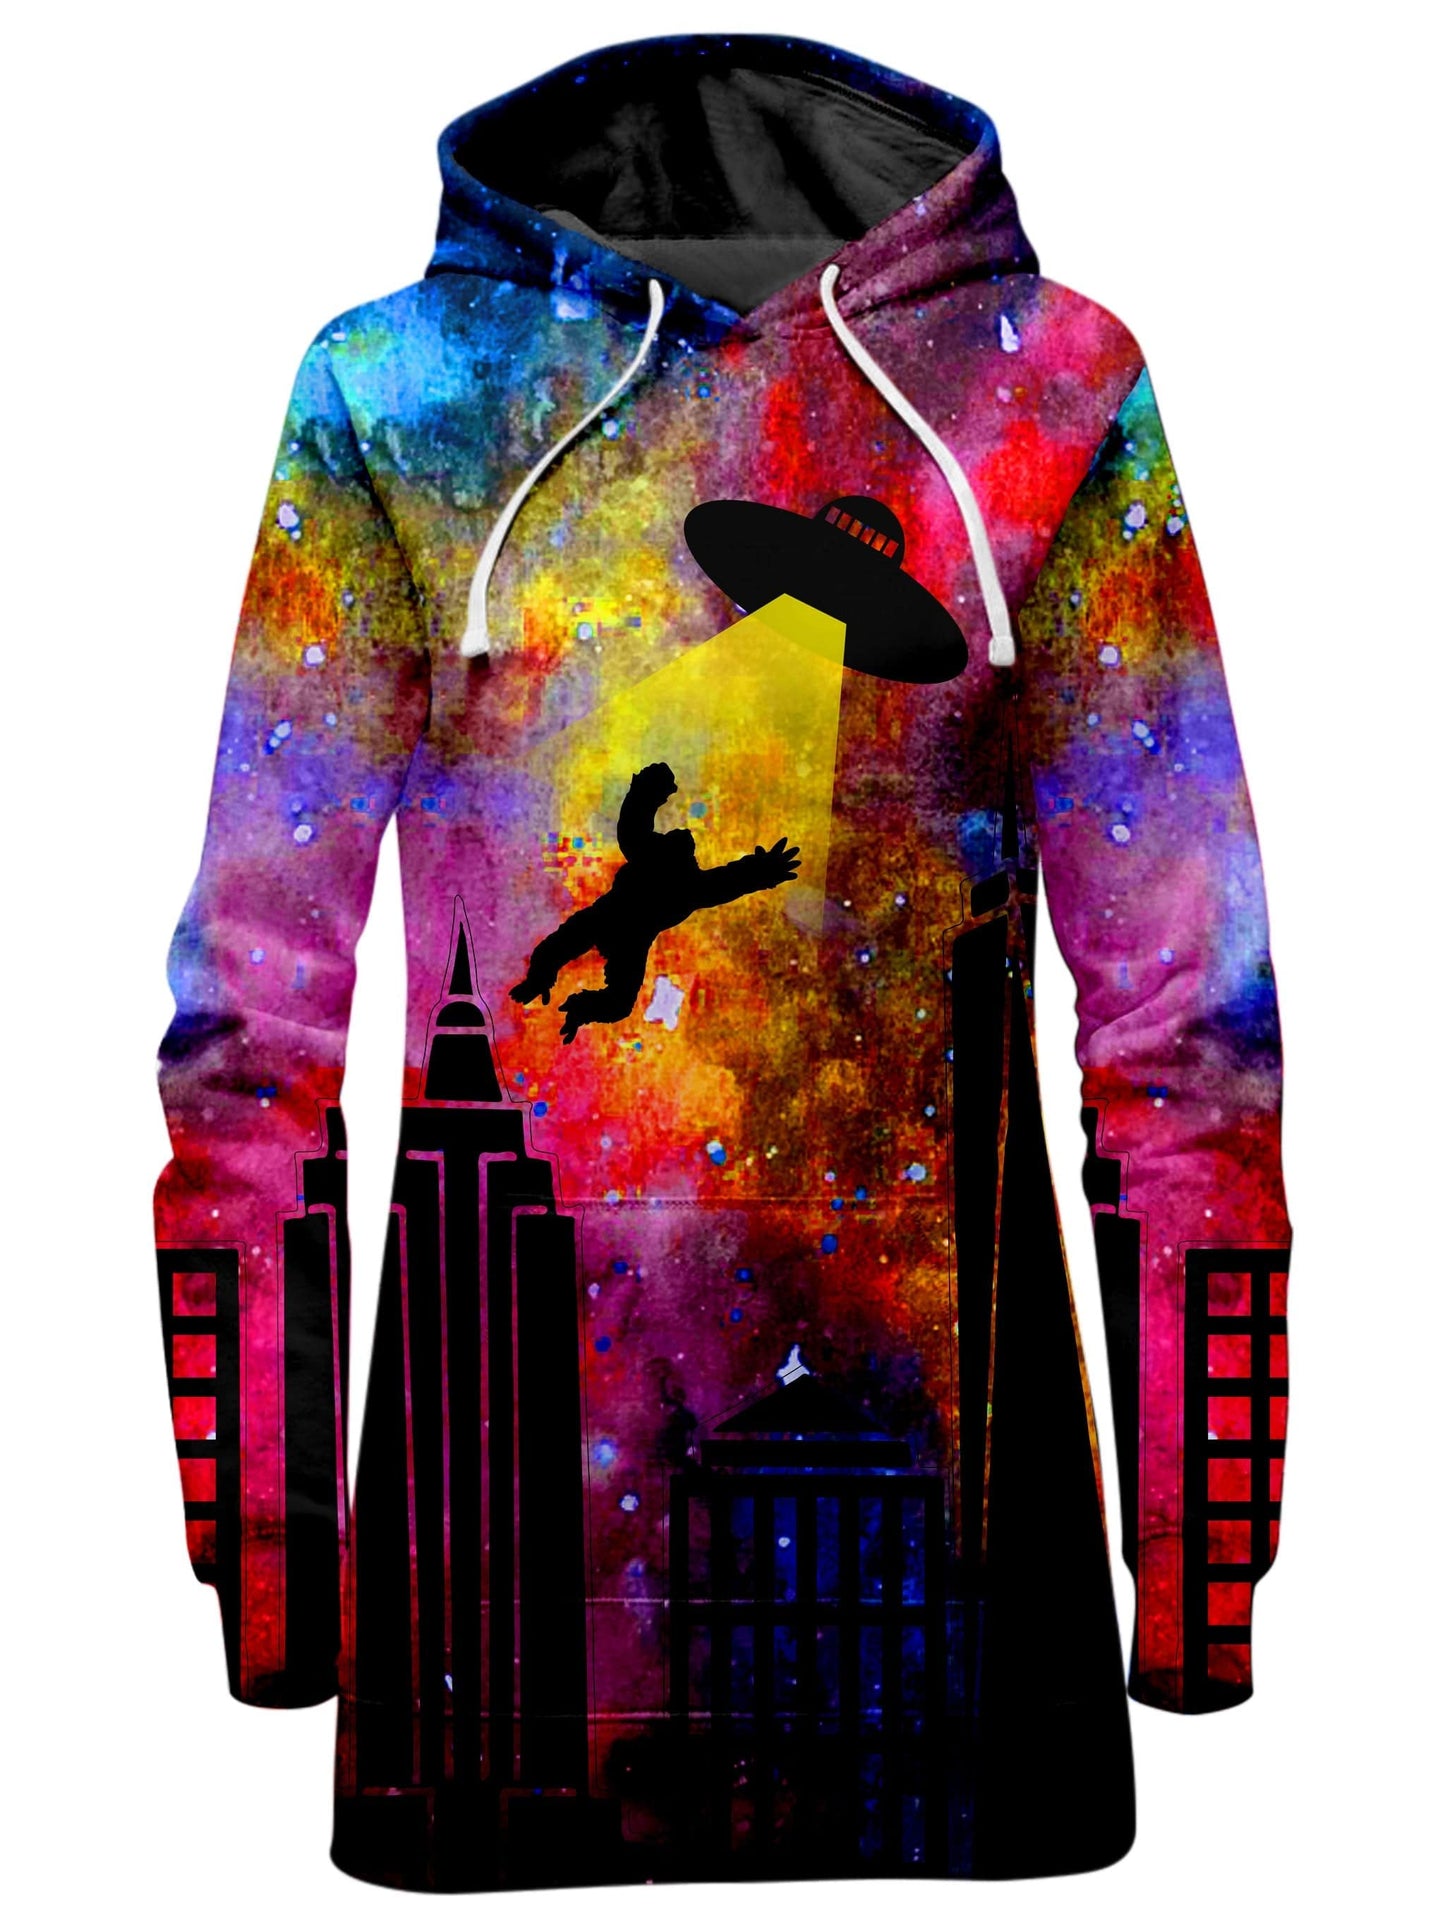 King Kong Abduction Hoodie Dress, Noctum X Truth, | iEDM